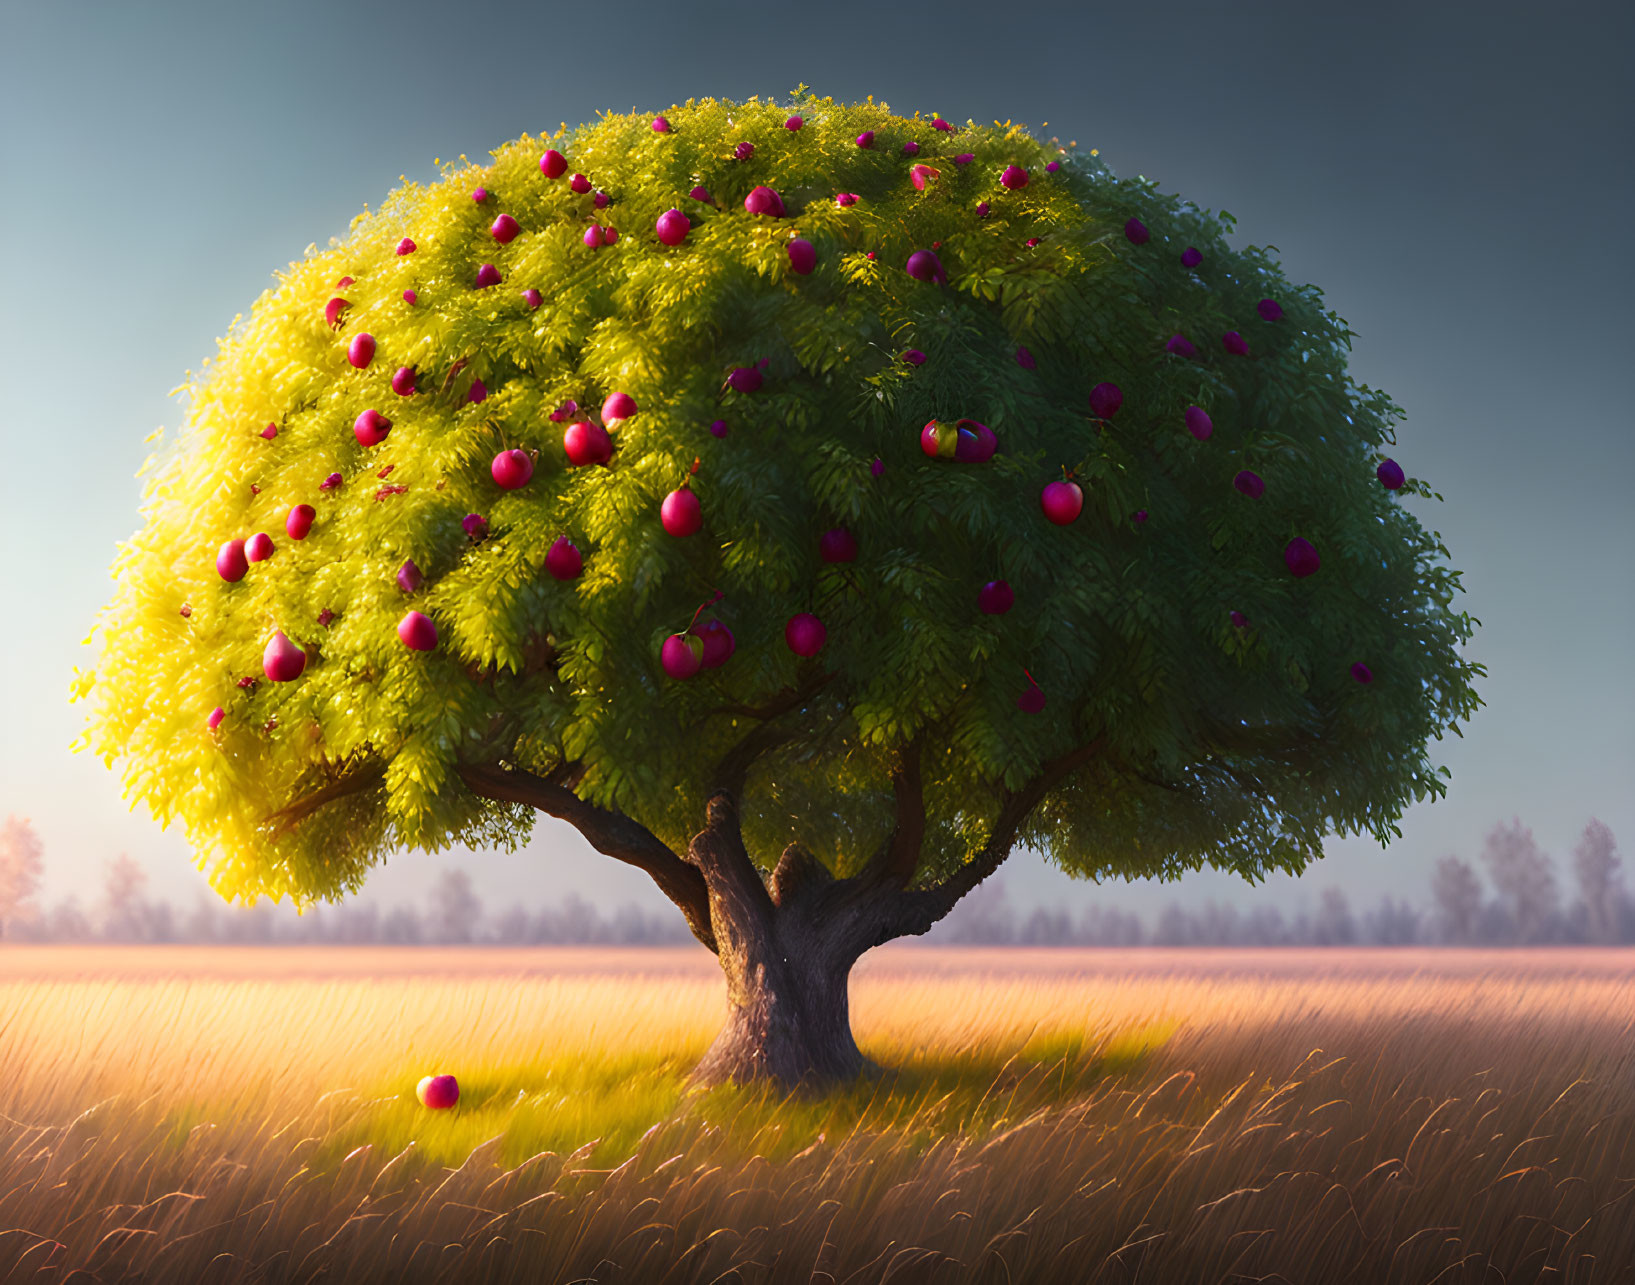 Vibrant tree with green foliage and red fruits in golden field under warm sunlight